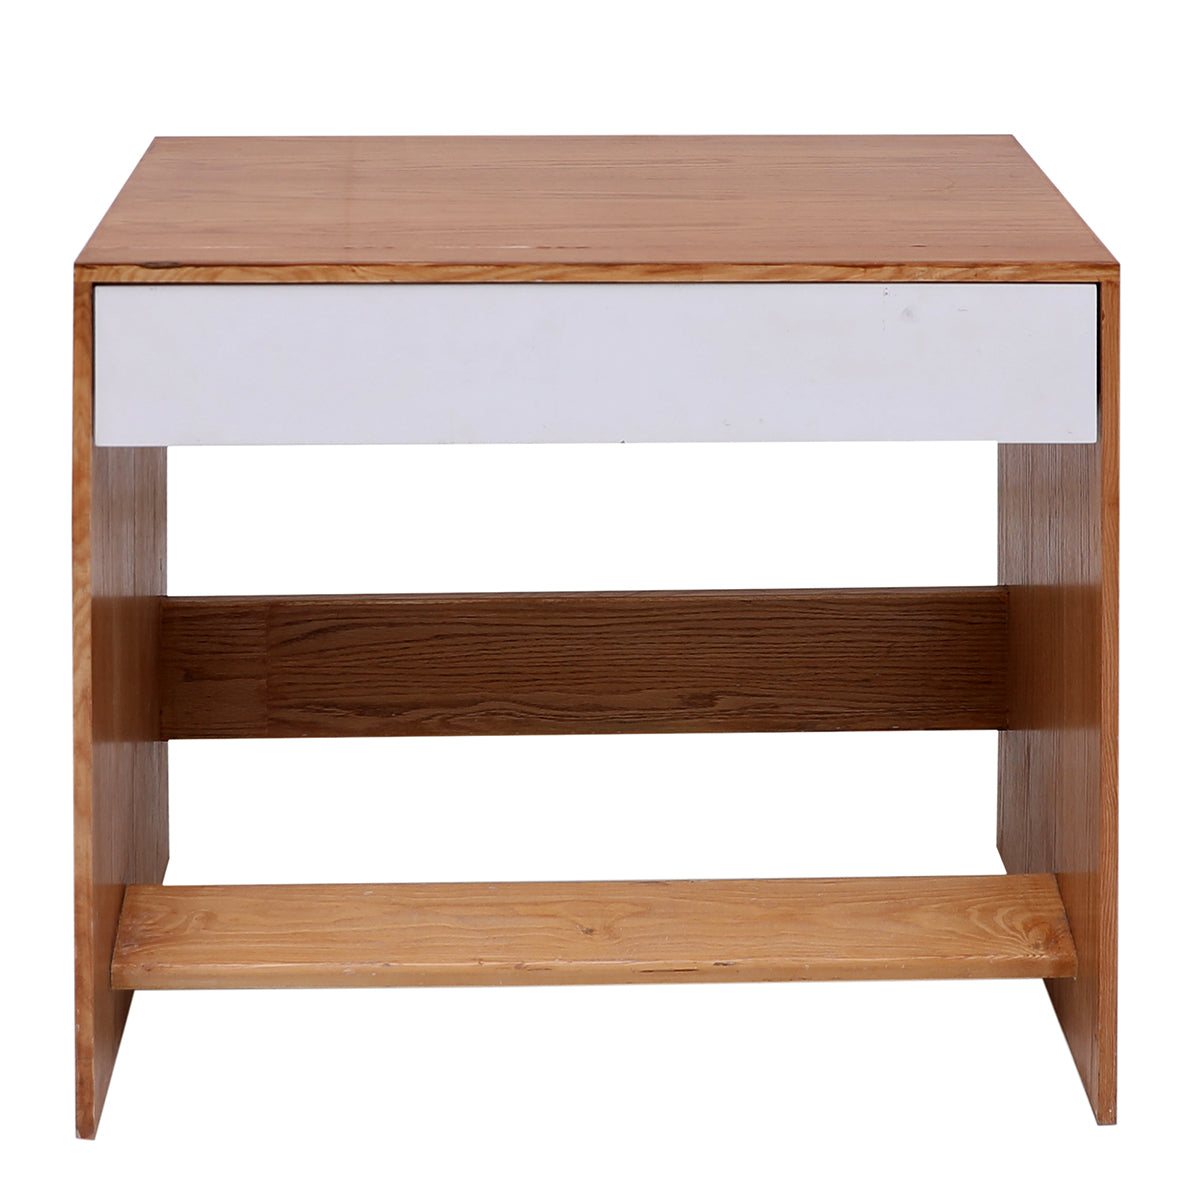 Marigold Rille Writing Table With Drawers(Kids Series)